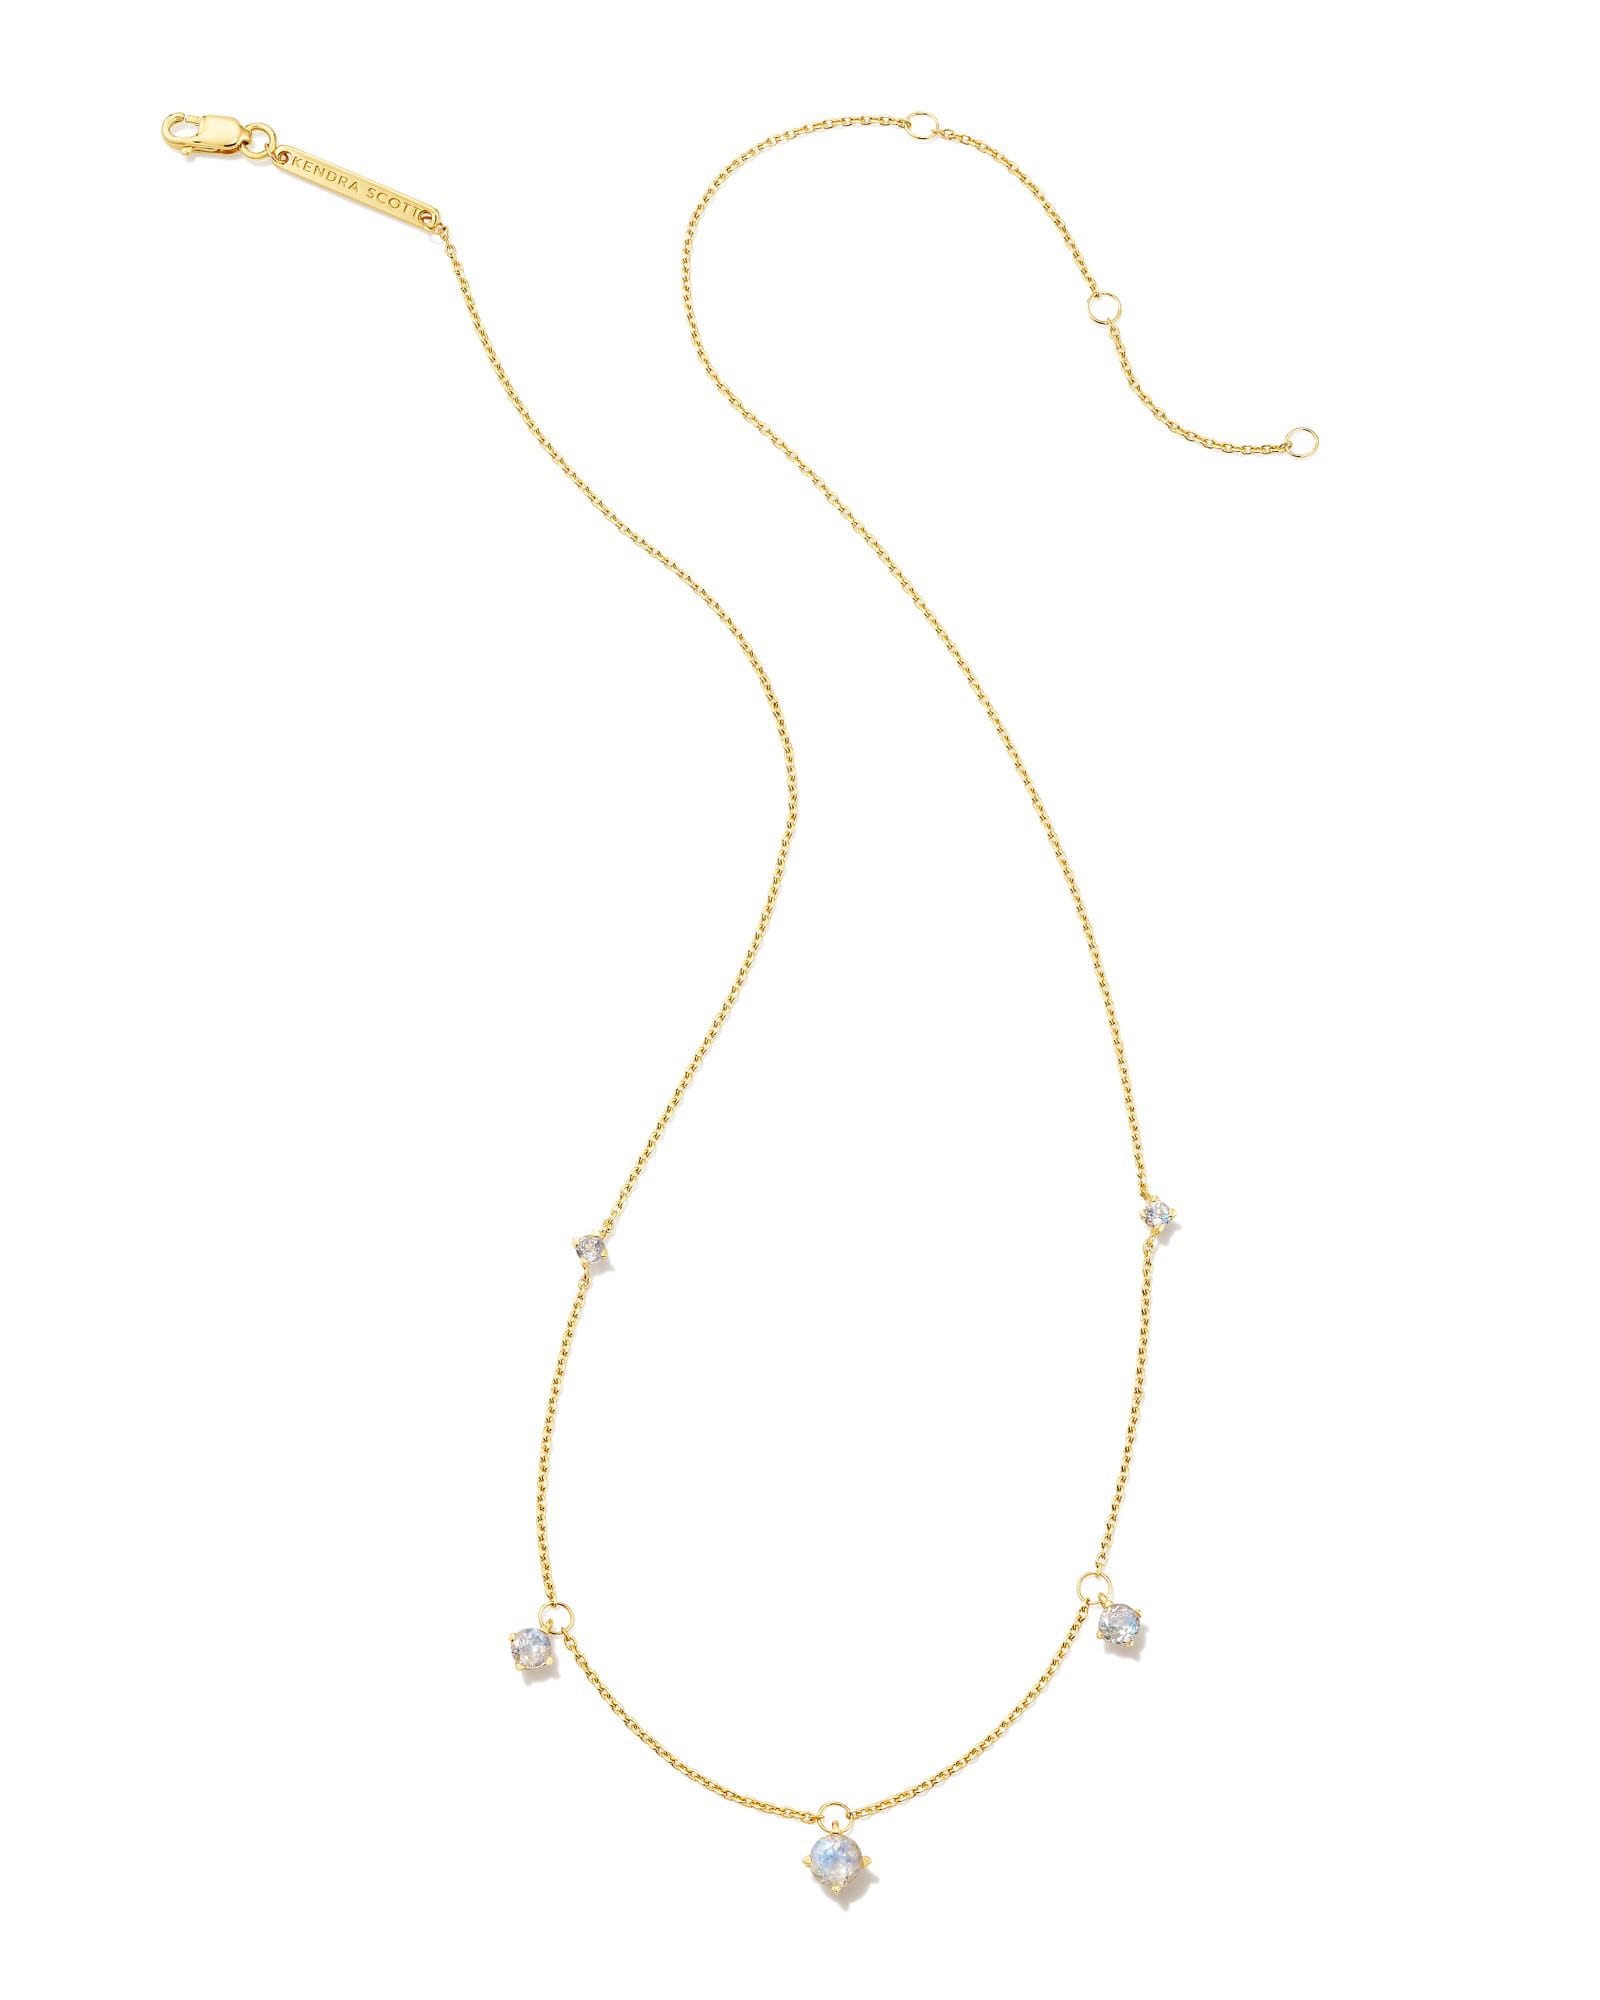 Blakely 18k Gold Vermeil Strand Necklace in Rainbow Moonstone